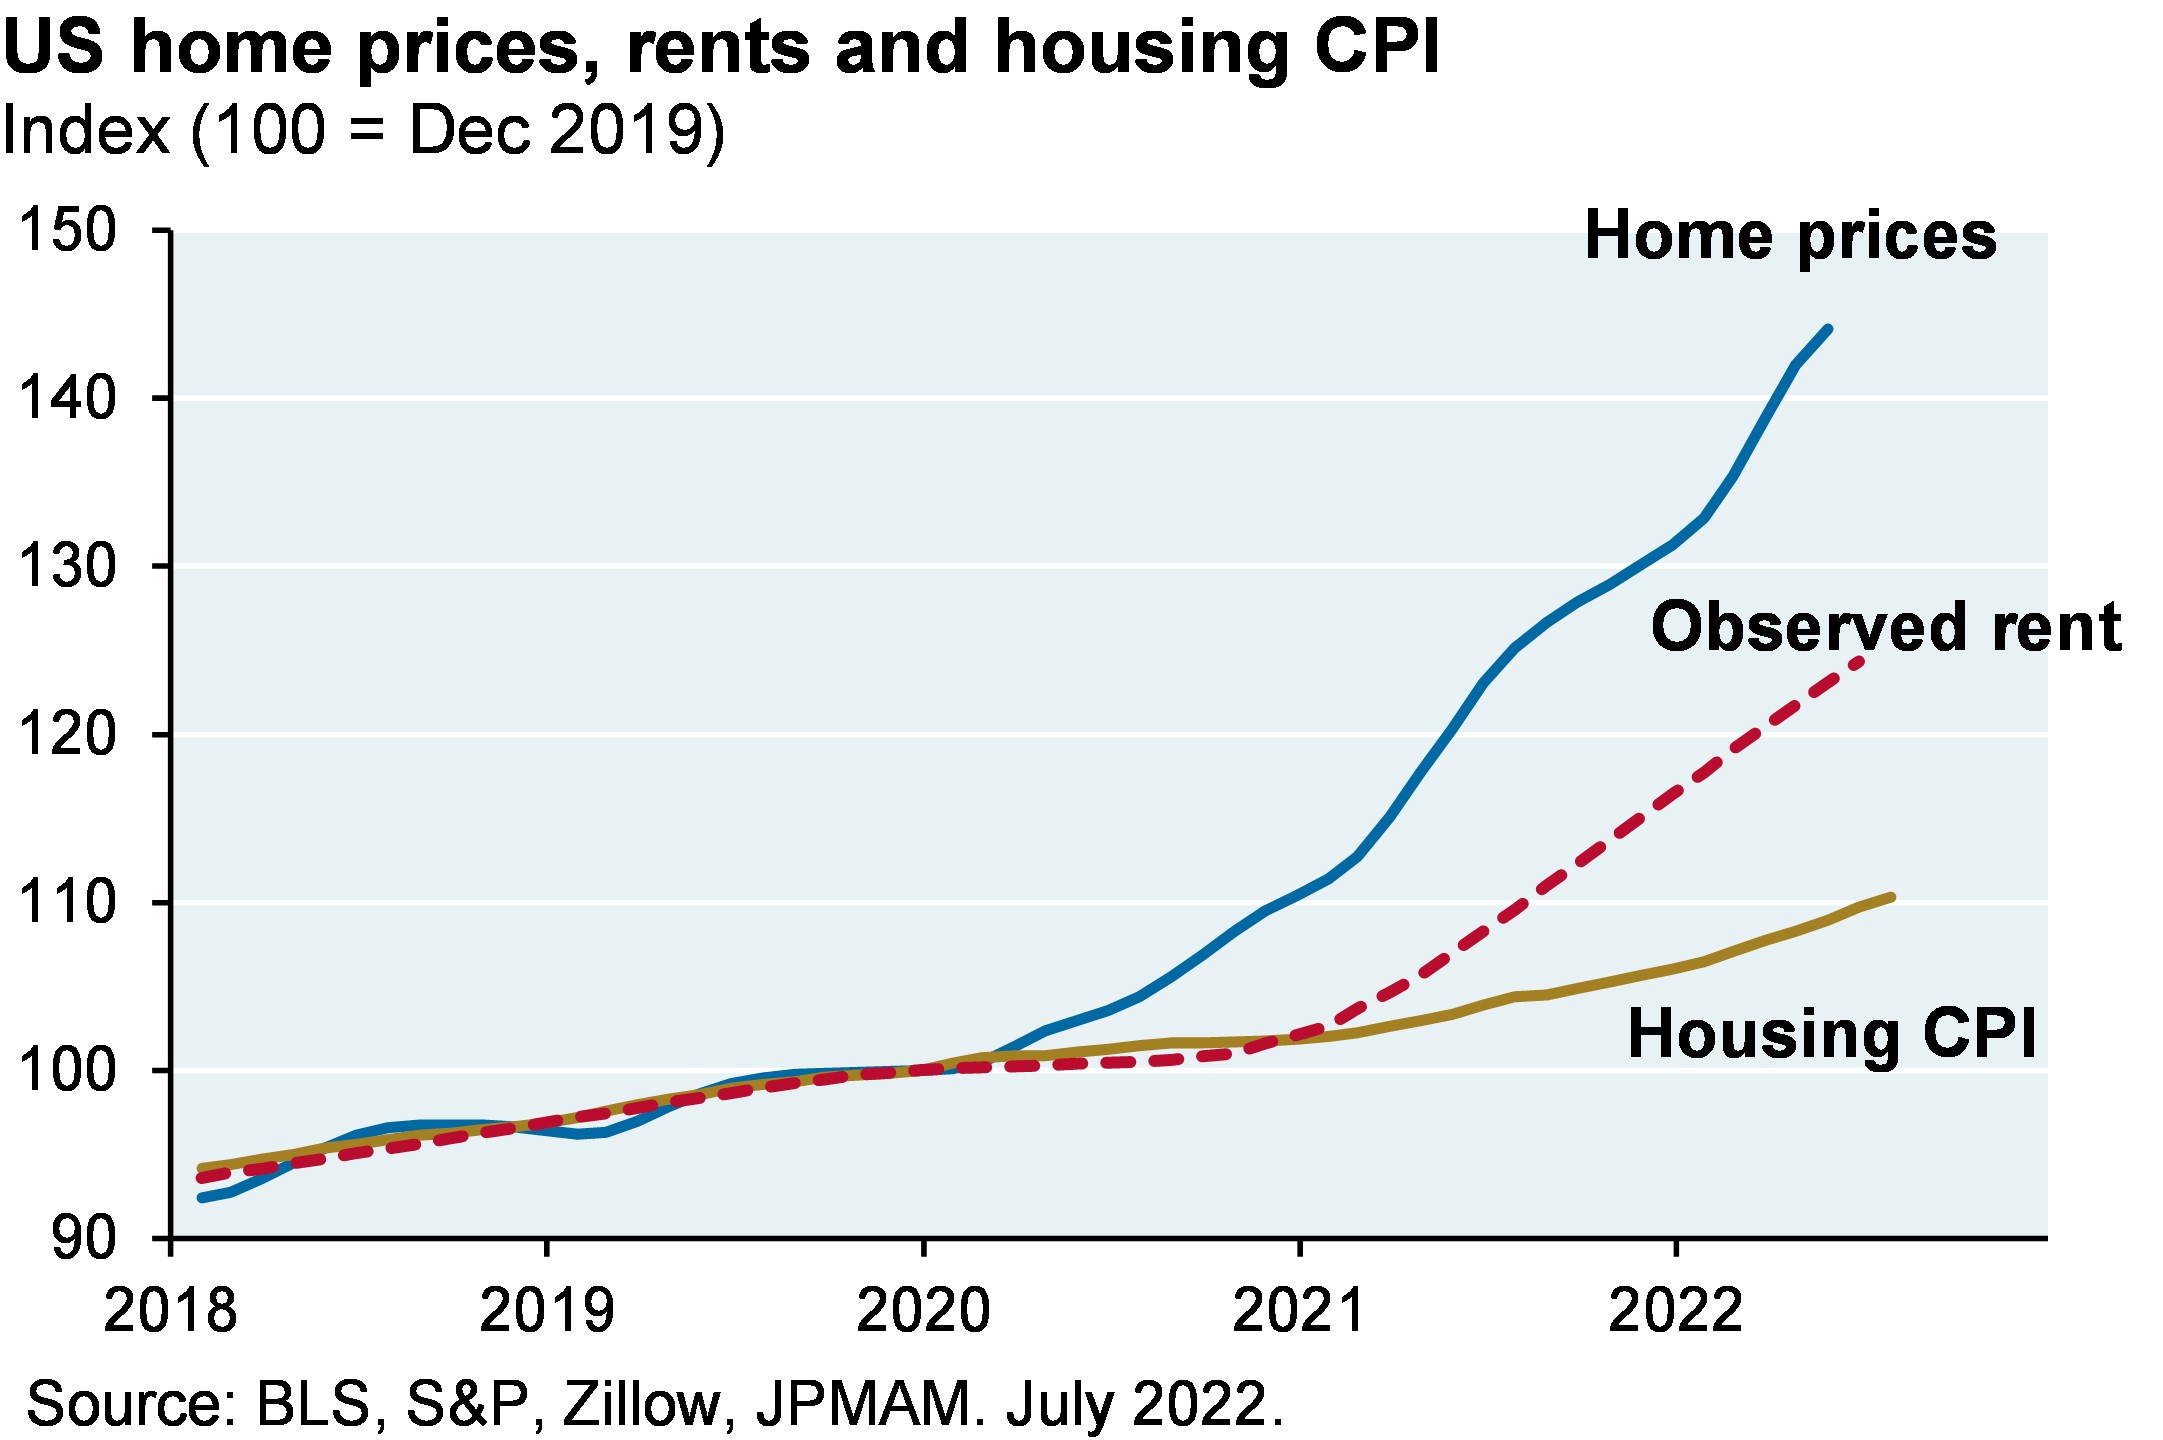 US home prices, rents and housing CPI